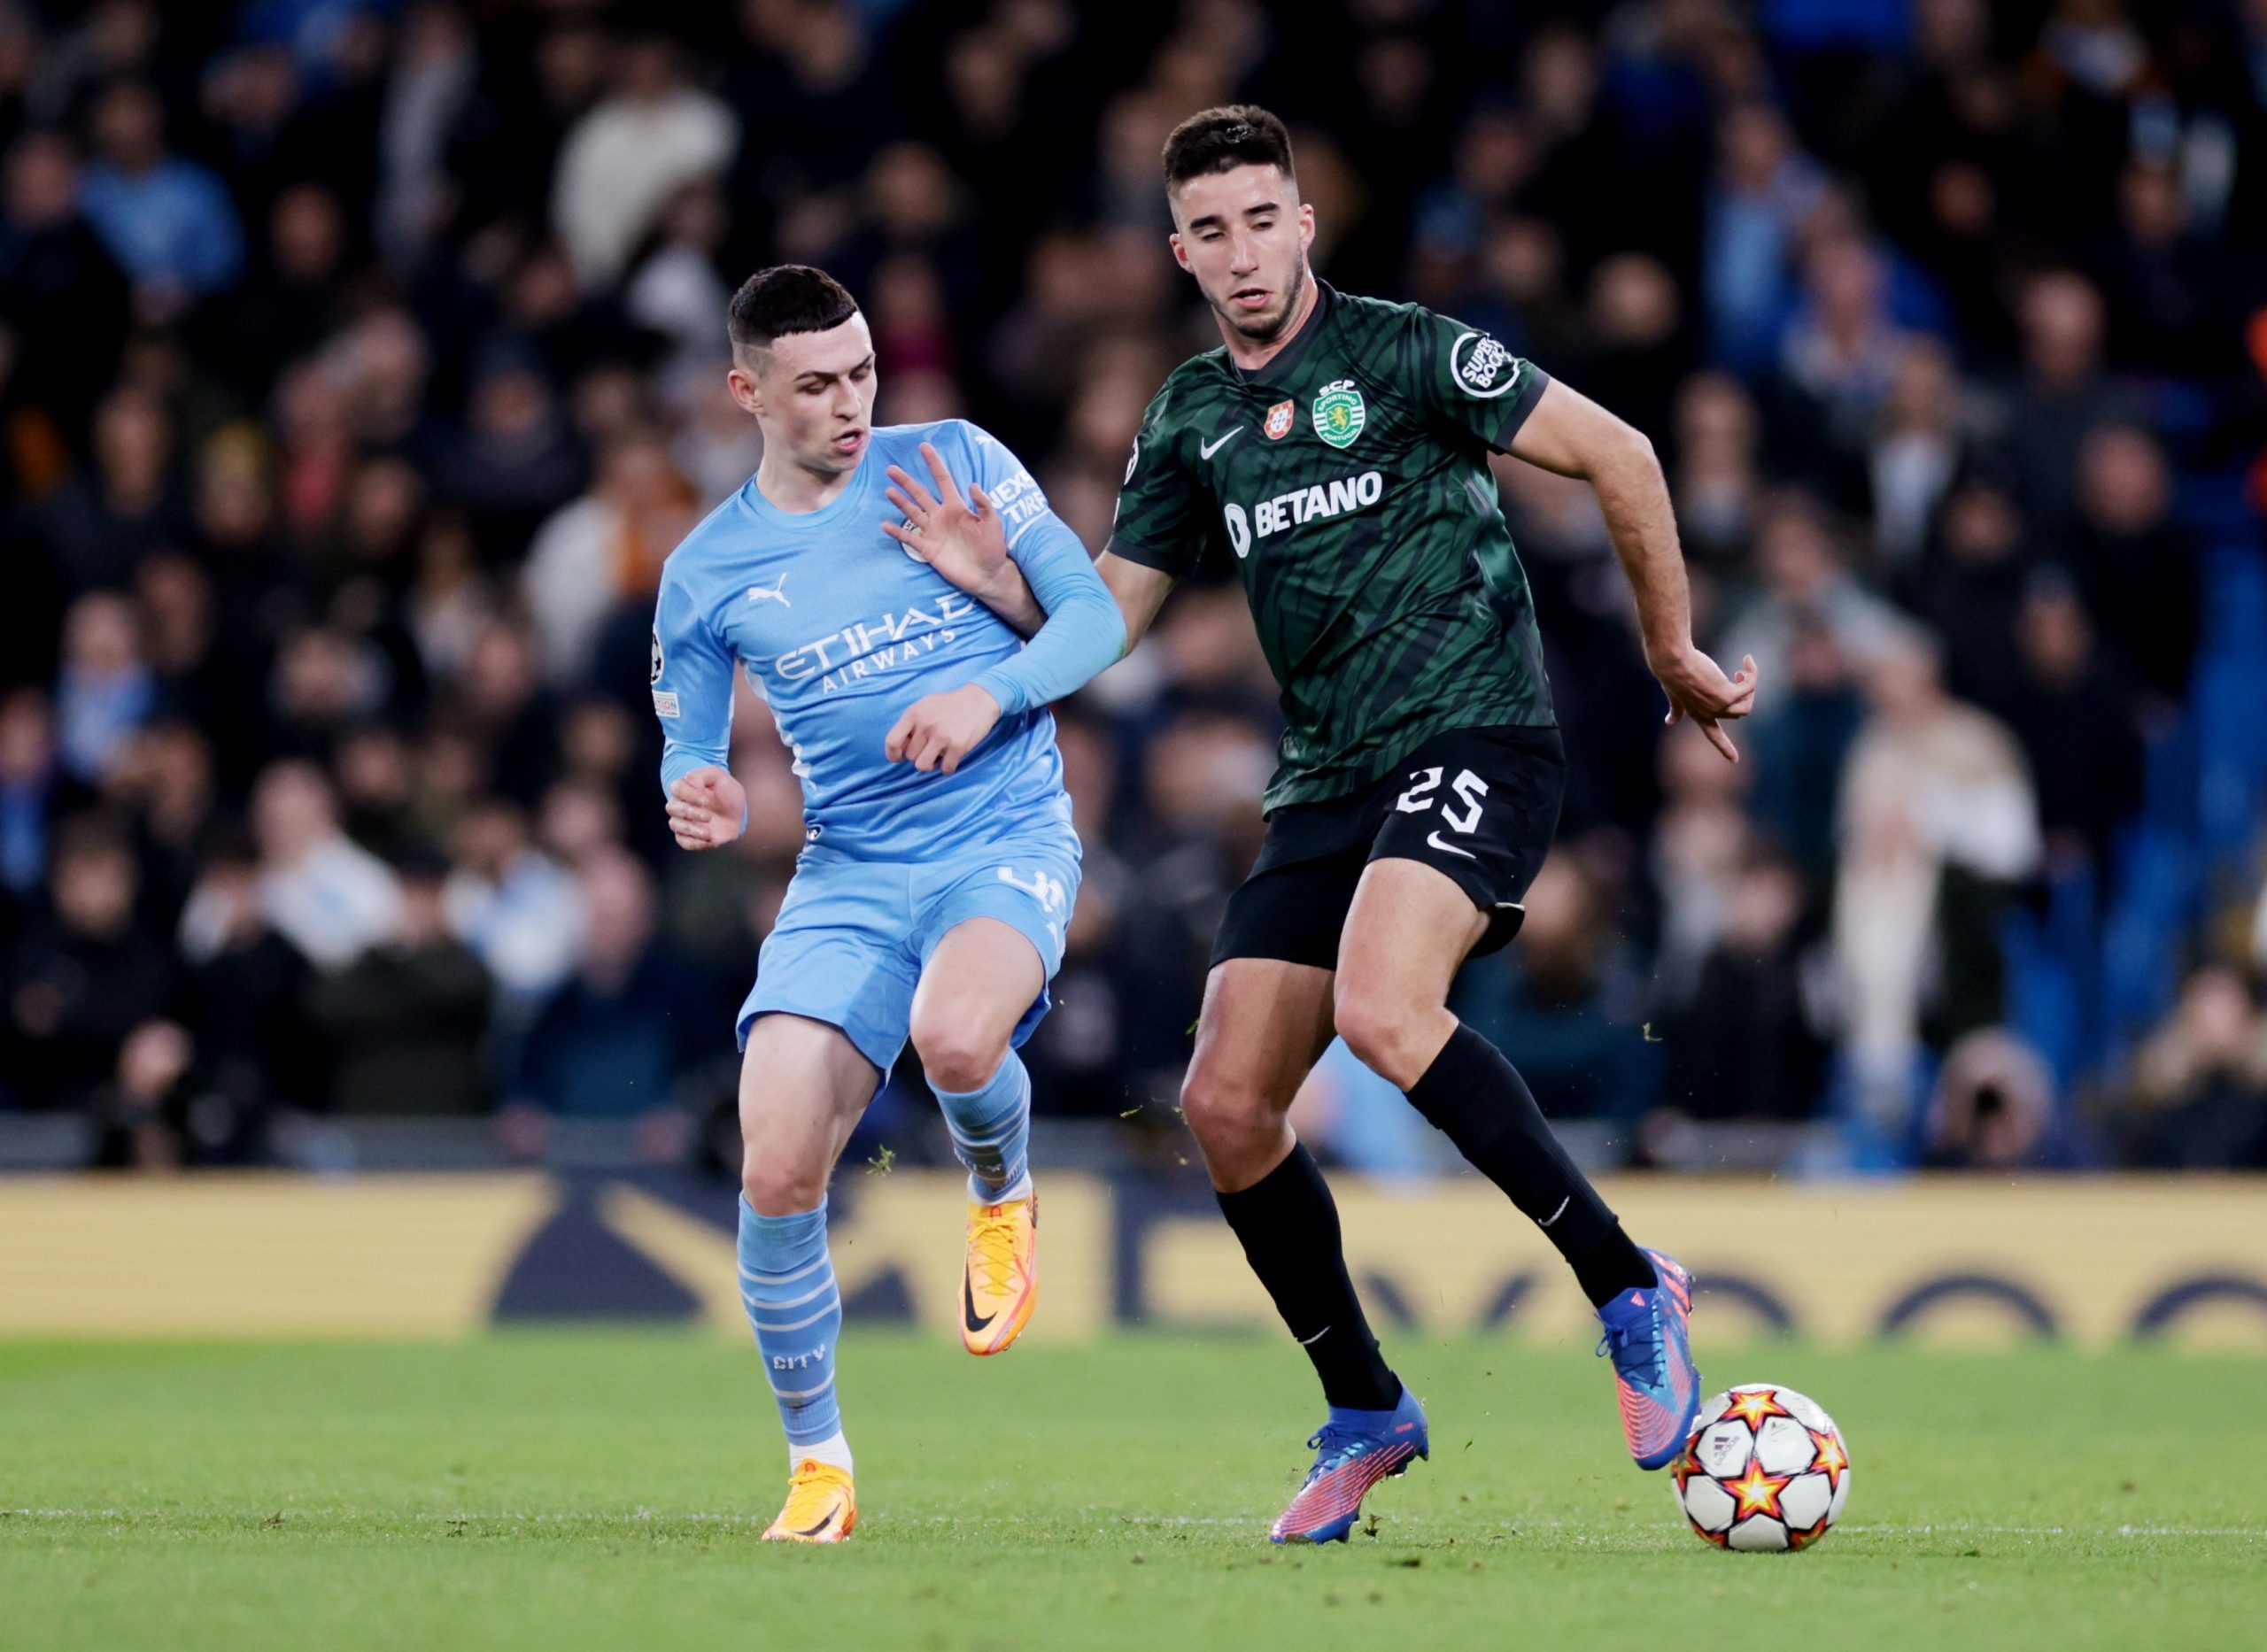 Soccer Football - Champions League - Round of 16 Second Leg - Manchester City v Sporting CP - Etihad Stadium, Manchester, Britain - March 9, 2022 Manchester City's Phil Foden in action with Sporting CP's Goncalo Inacio Action Images via Reuters/Lee Smith